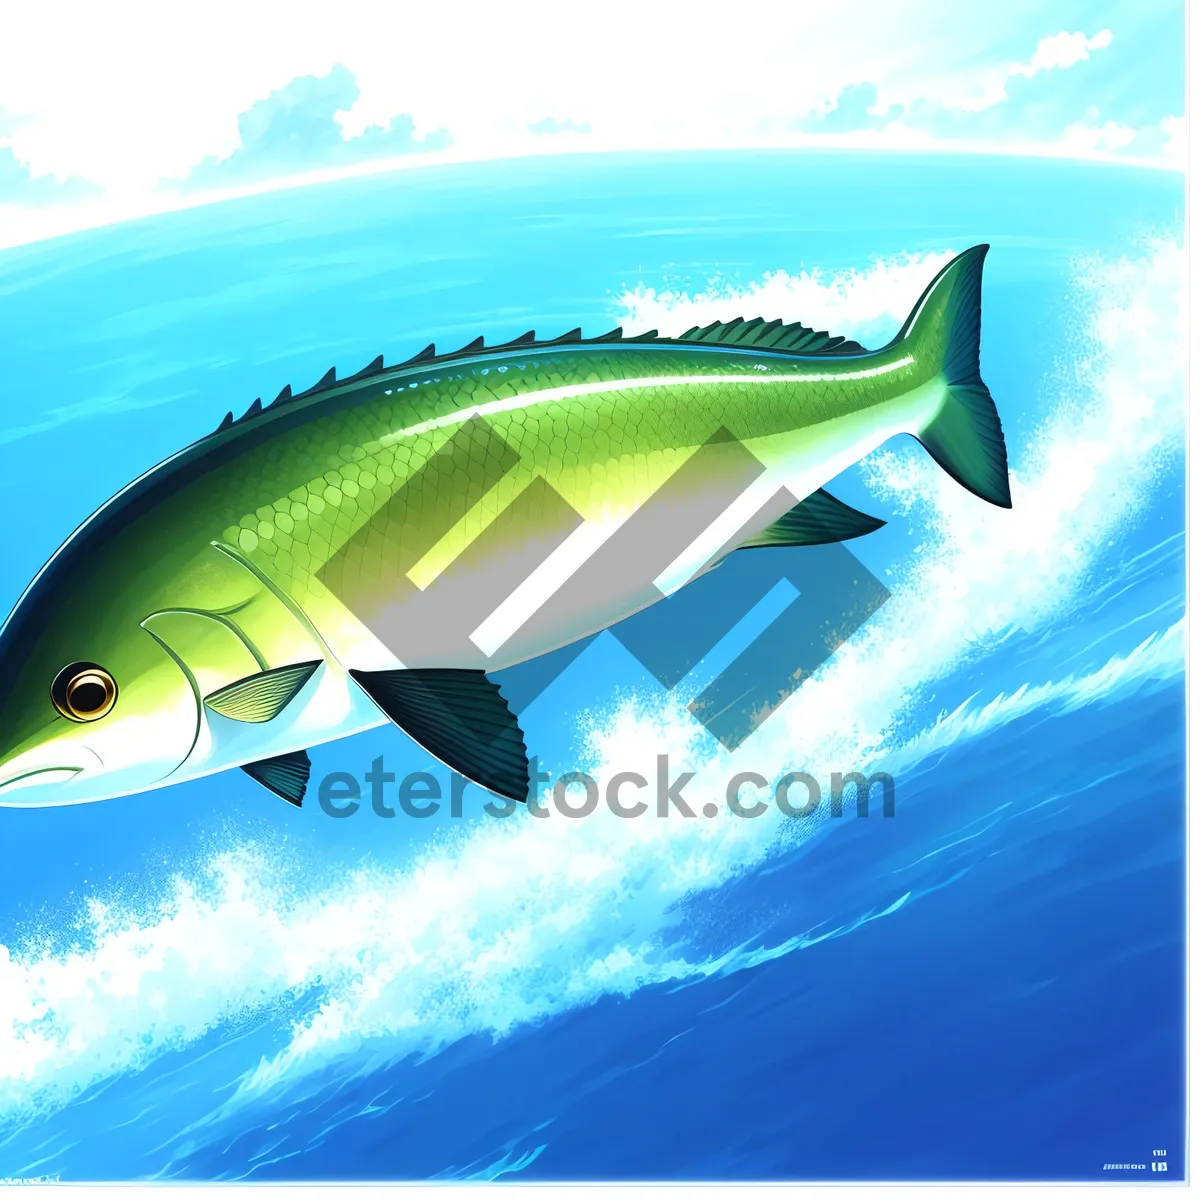 Picture of Tropical Ocean Snapper: Sumptuous Seafood Delight